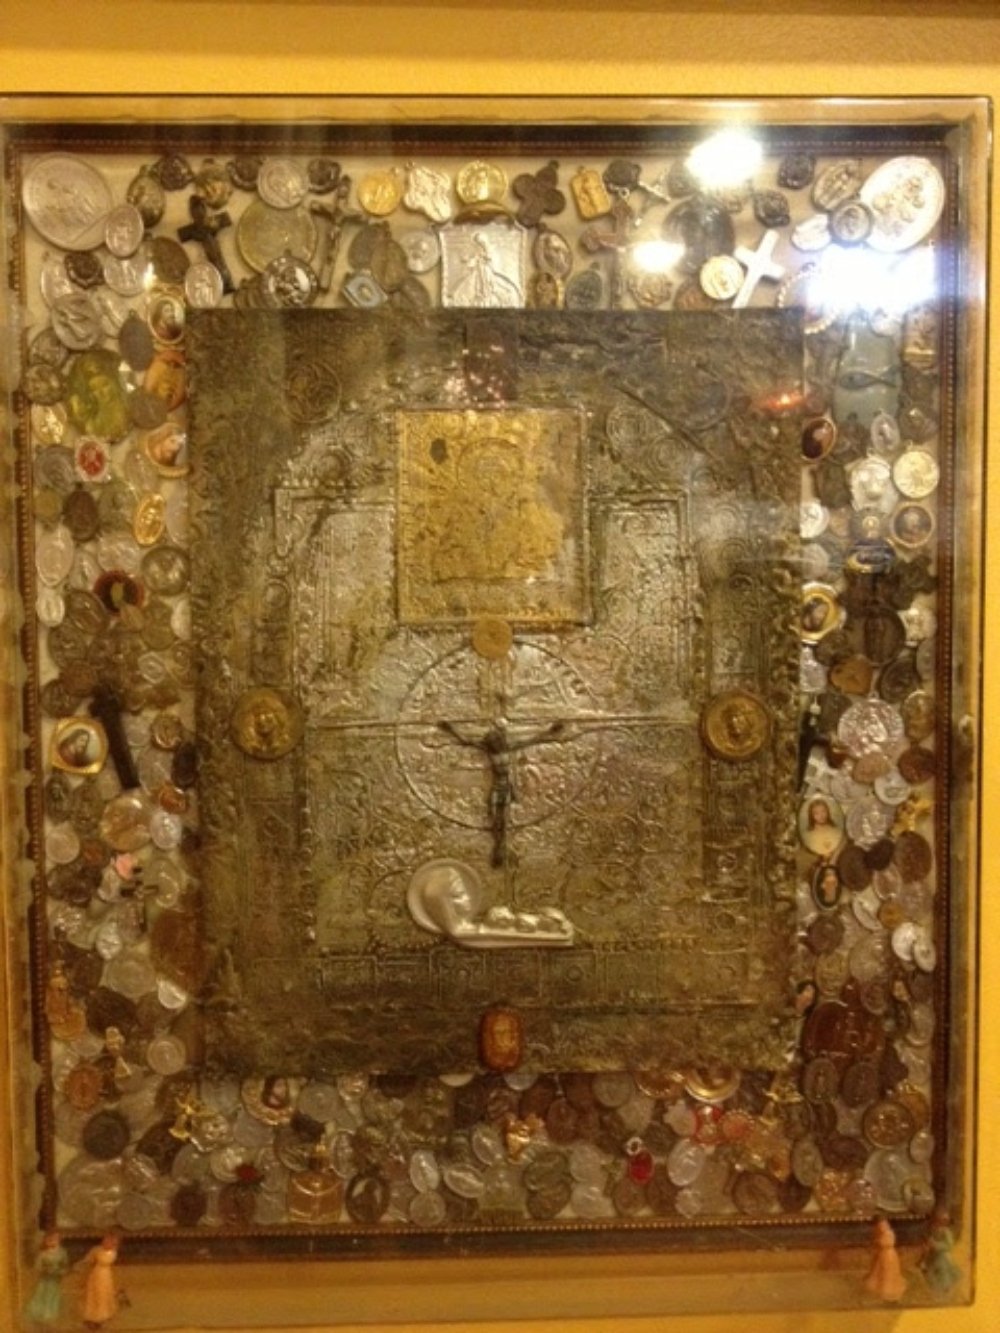 20210714 PMArmstrong Original Medal Mosaic at Little Rose Chapel